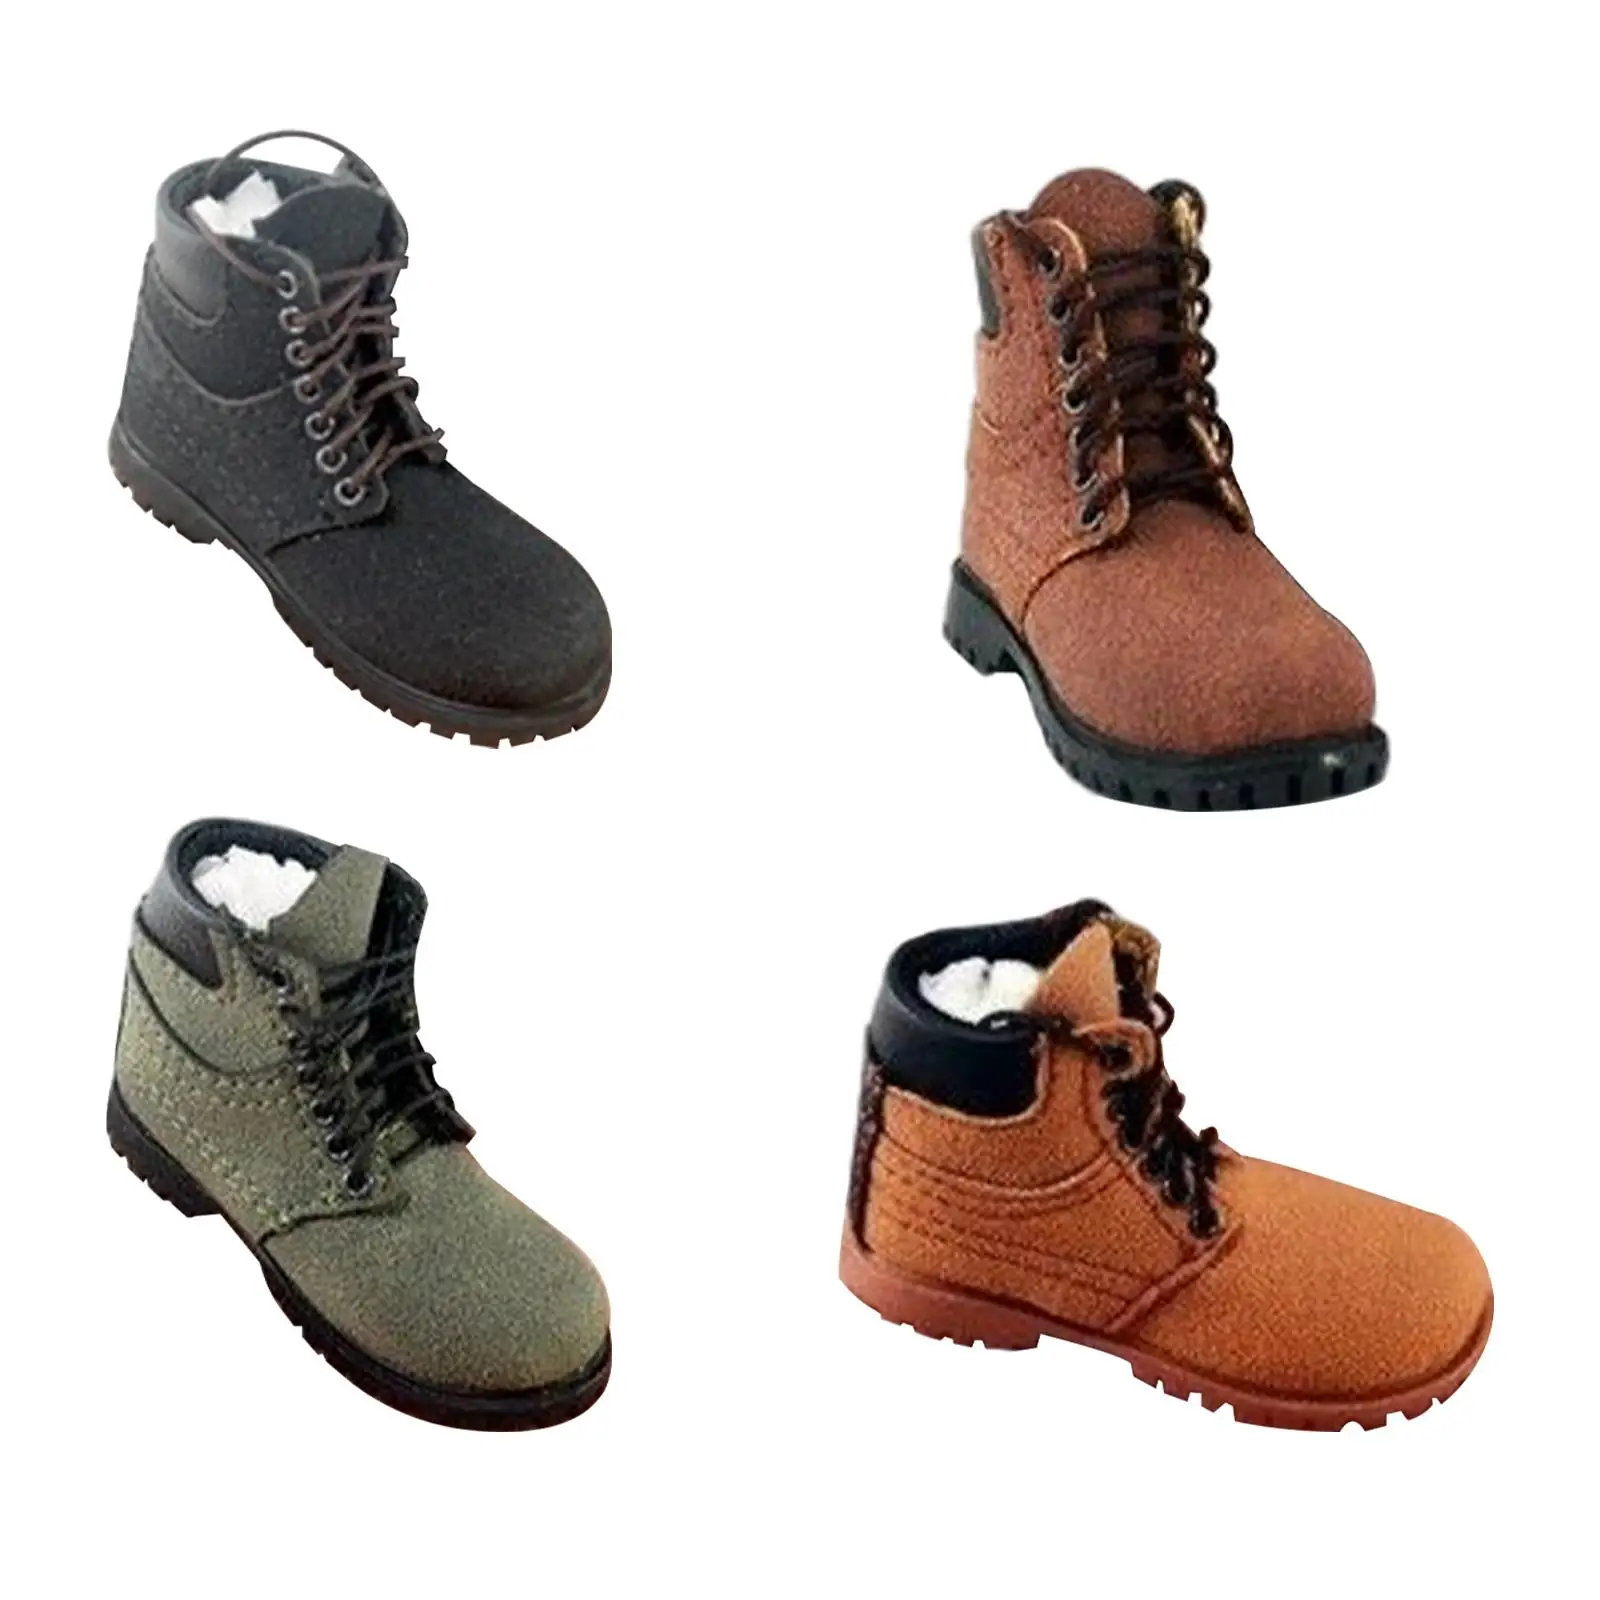 Miniature Mountaineering Boots 1/6 Scale Shoes for Male Doll Model Accessory